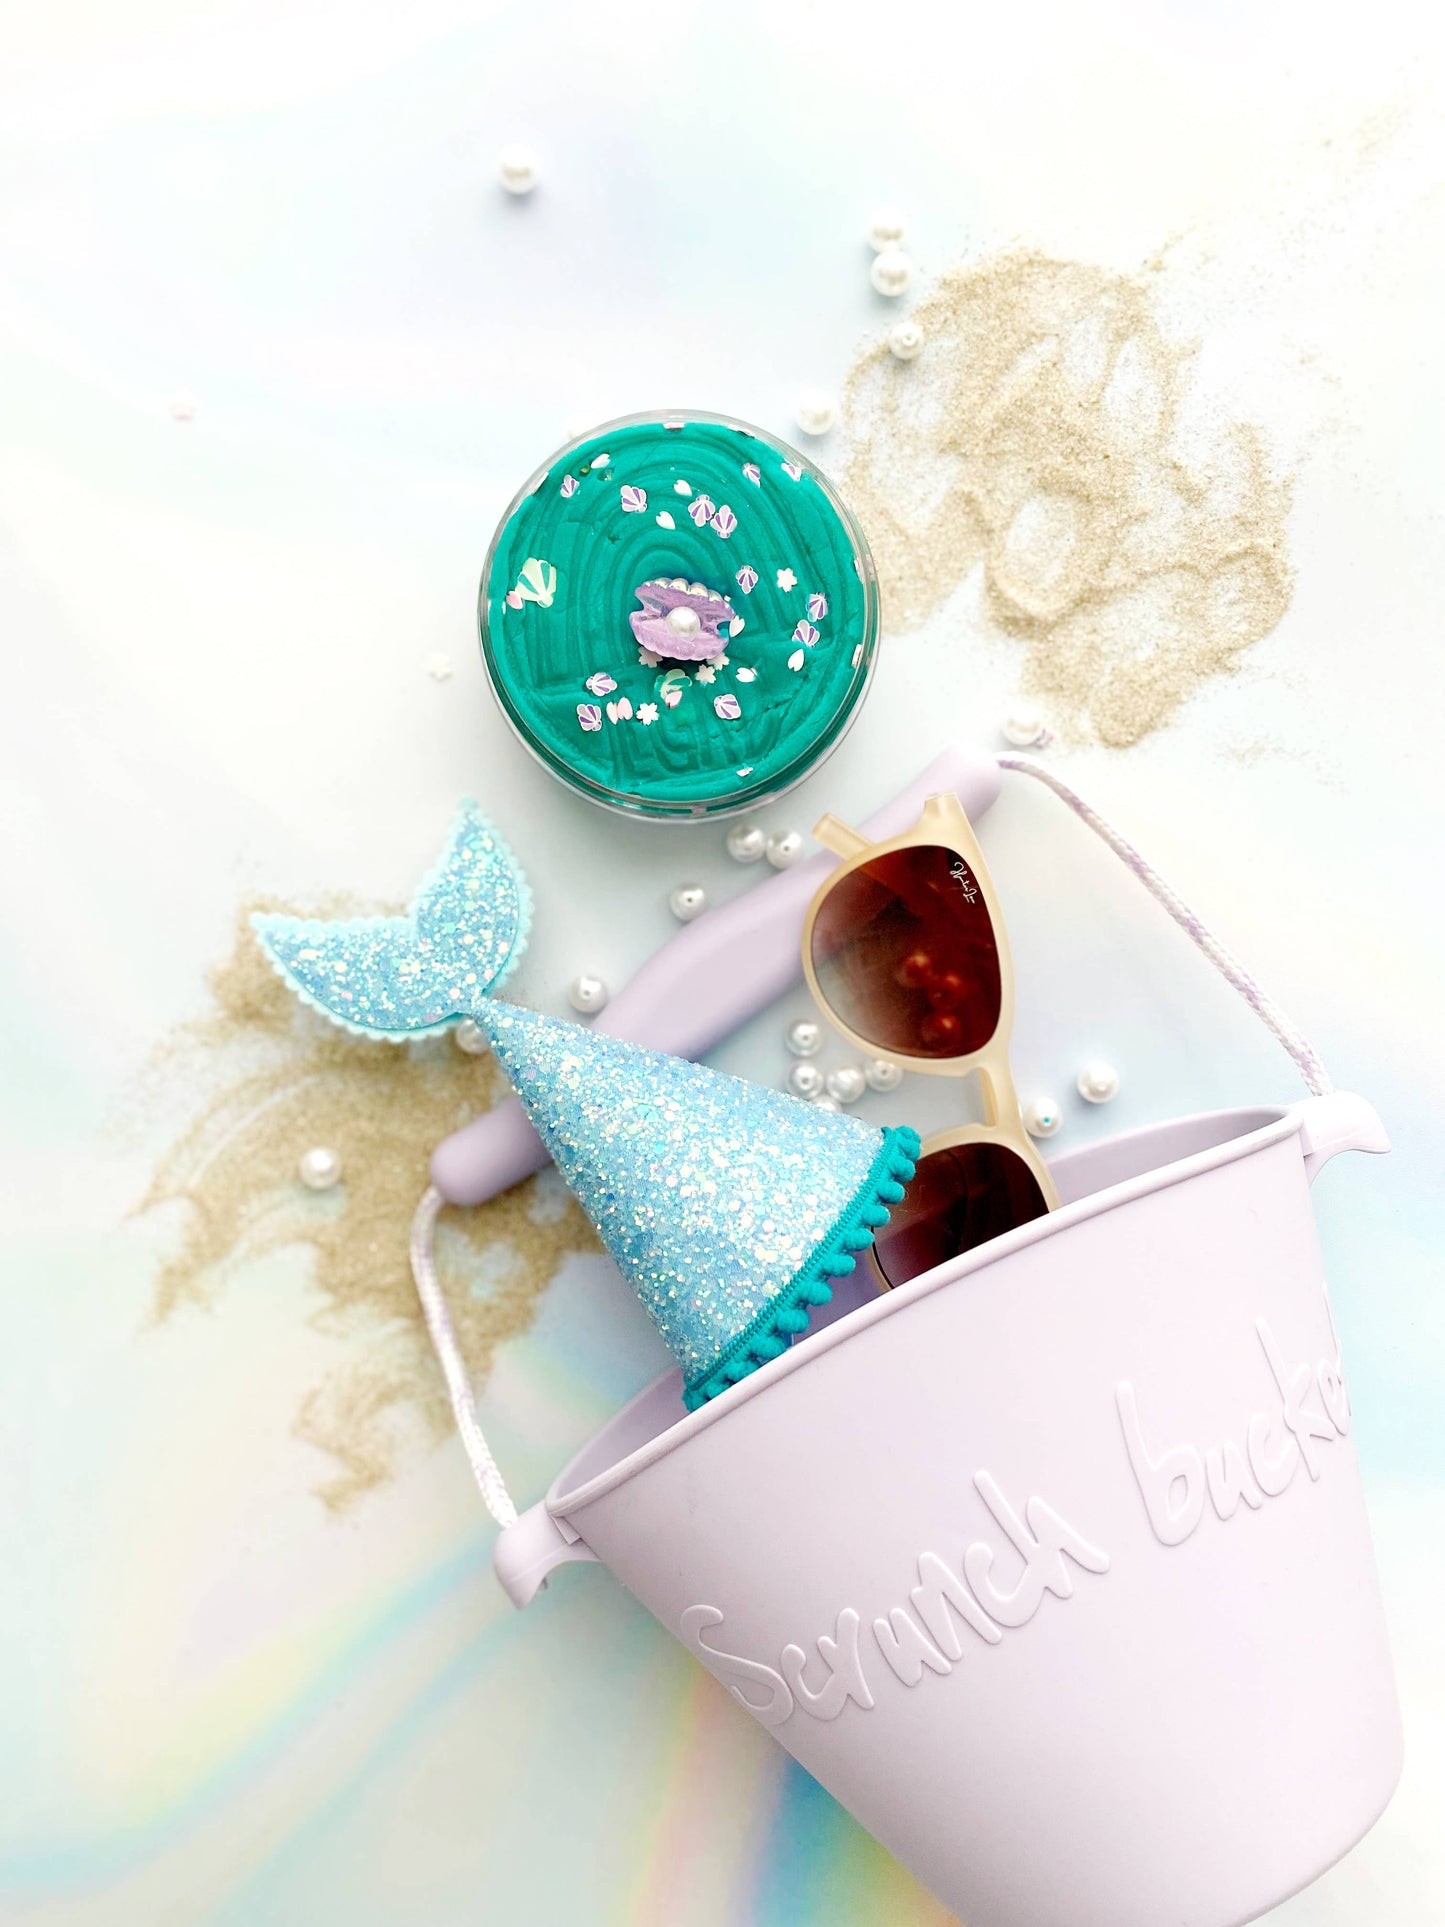 Mermaid Pearl Party (Tropical Punch) Half Pound Play Dough